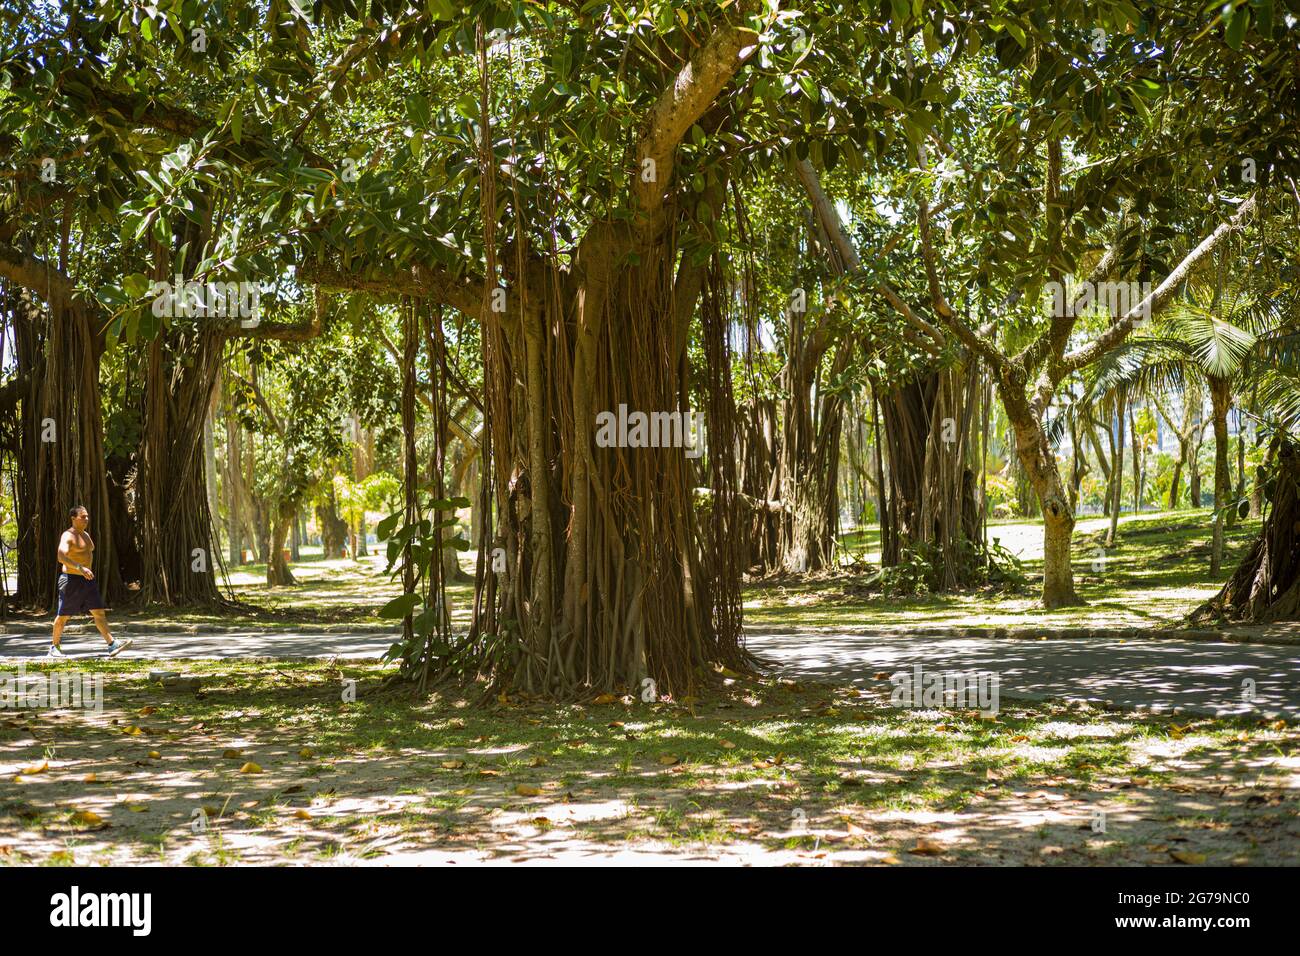 Large fig trees with many supports and branches drooping to the ground in Flamengo Park - Parque Aterro do Flamengo - in Rio de Janeiro. An extensive beachfront park with sports fields, walking/cycling paths, a skate park & art museum. Stock Photo